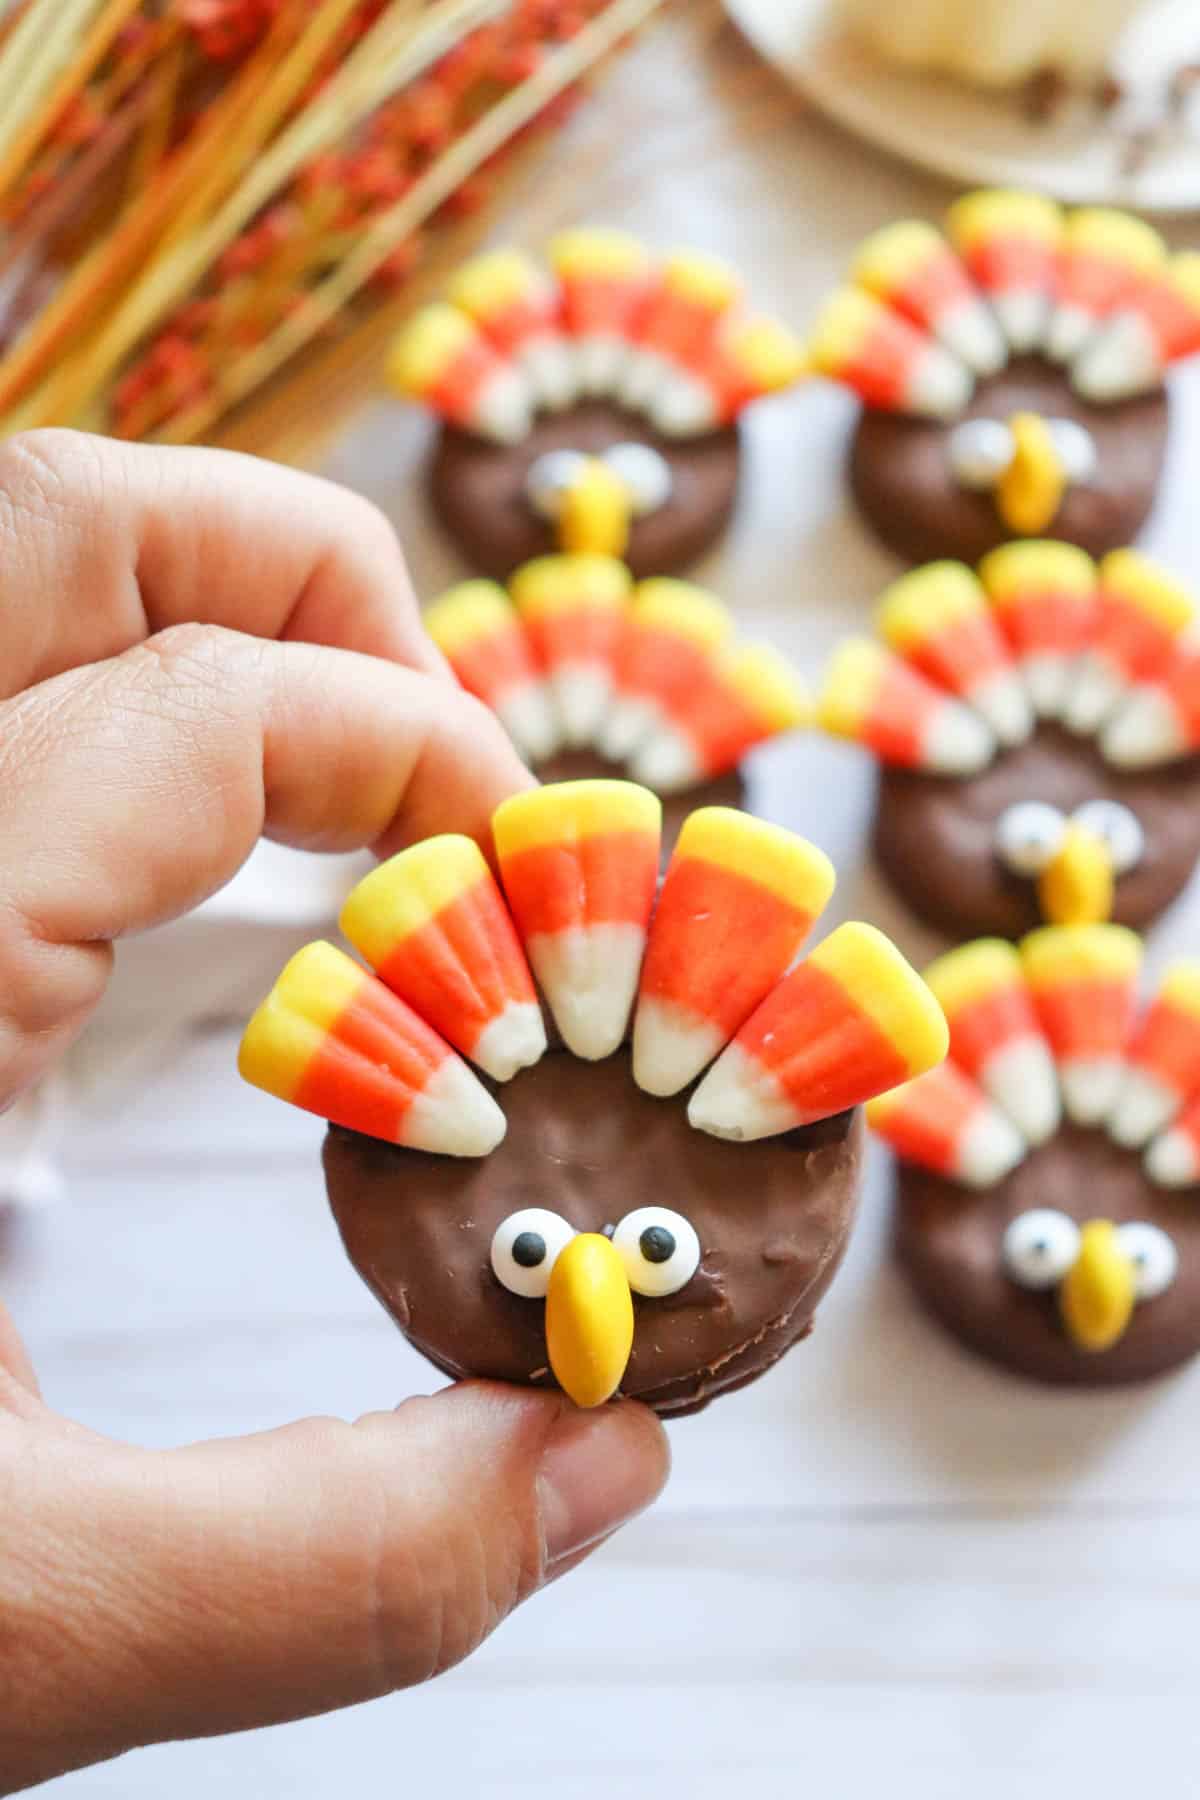 A hand holding a chocolate cookie decorated with candy corn, candy eyes and a yellow candy to look like a cute turkey.